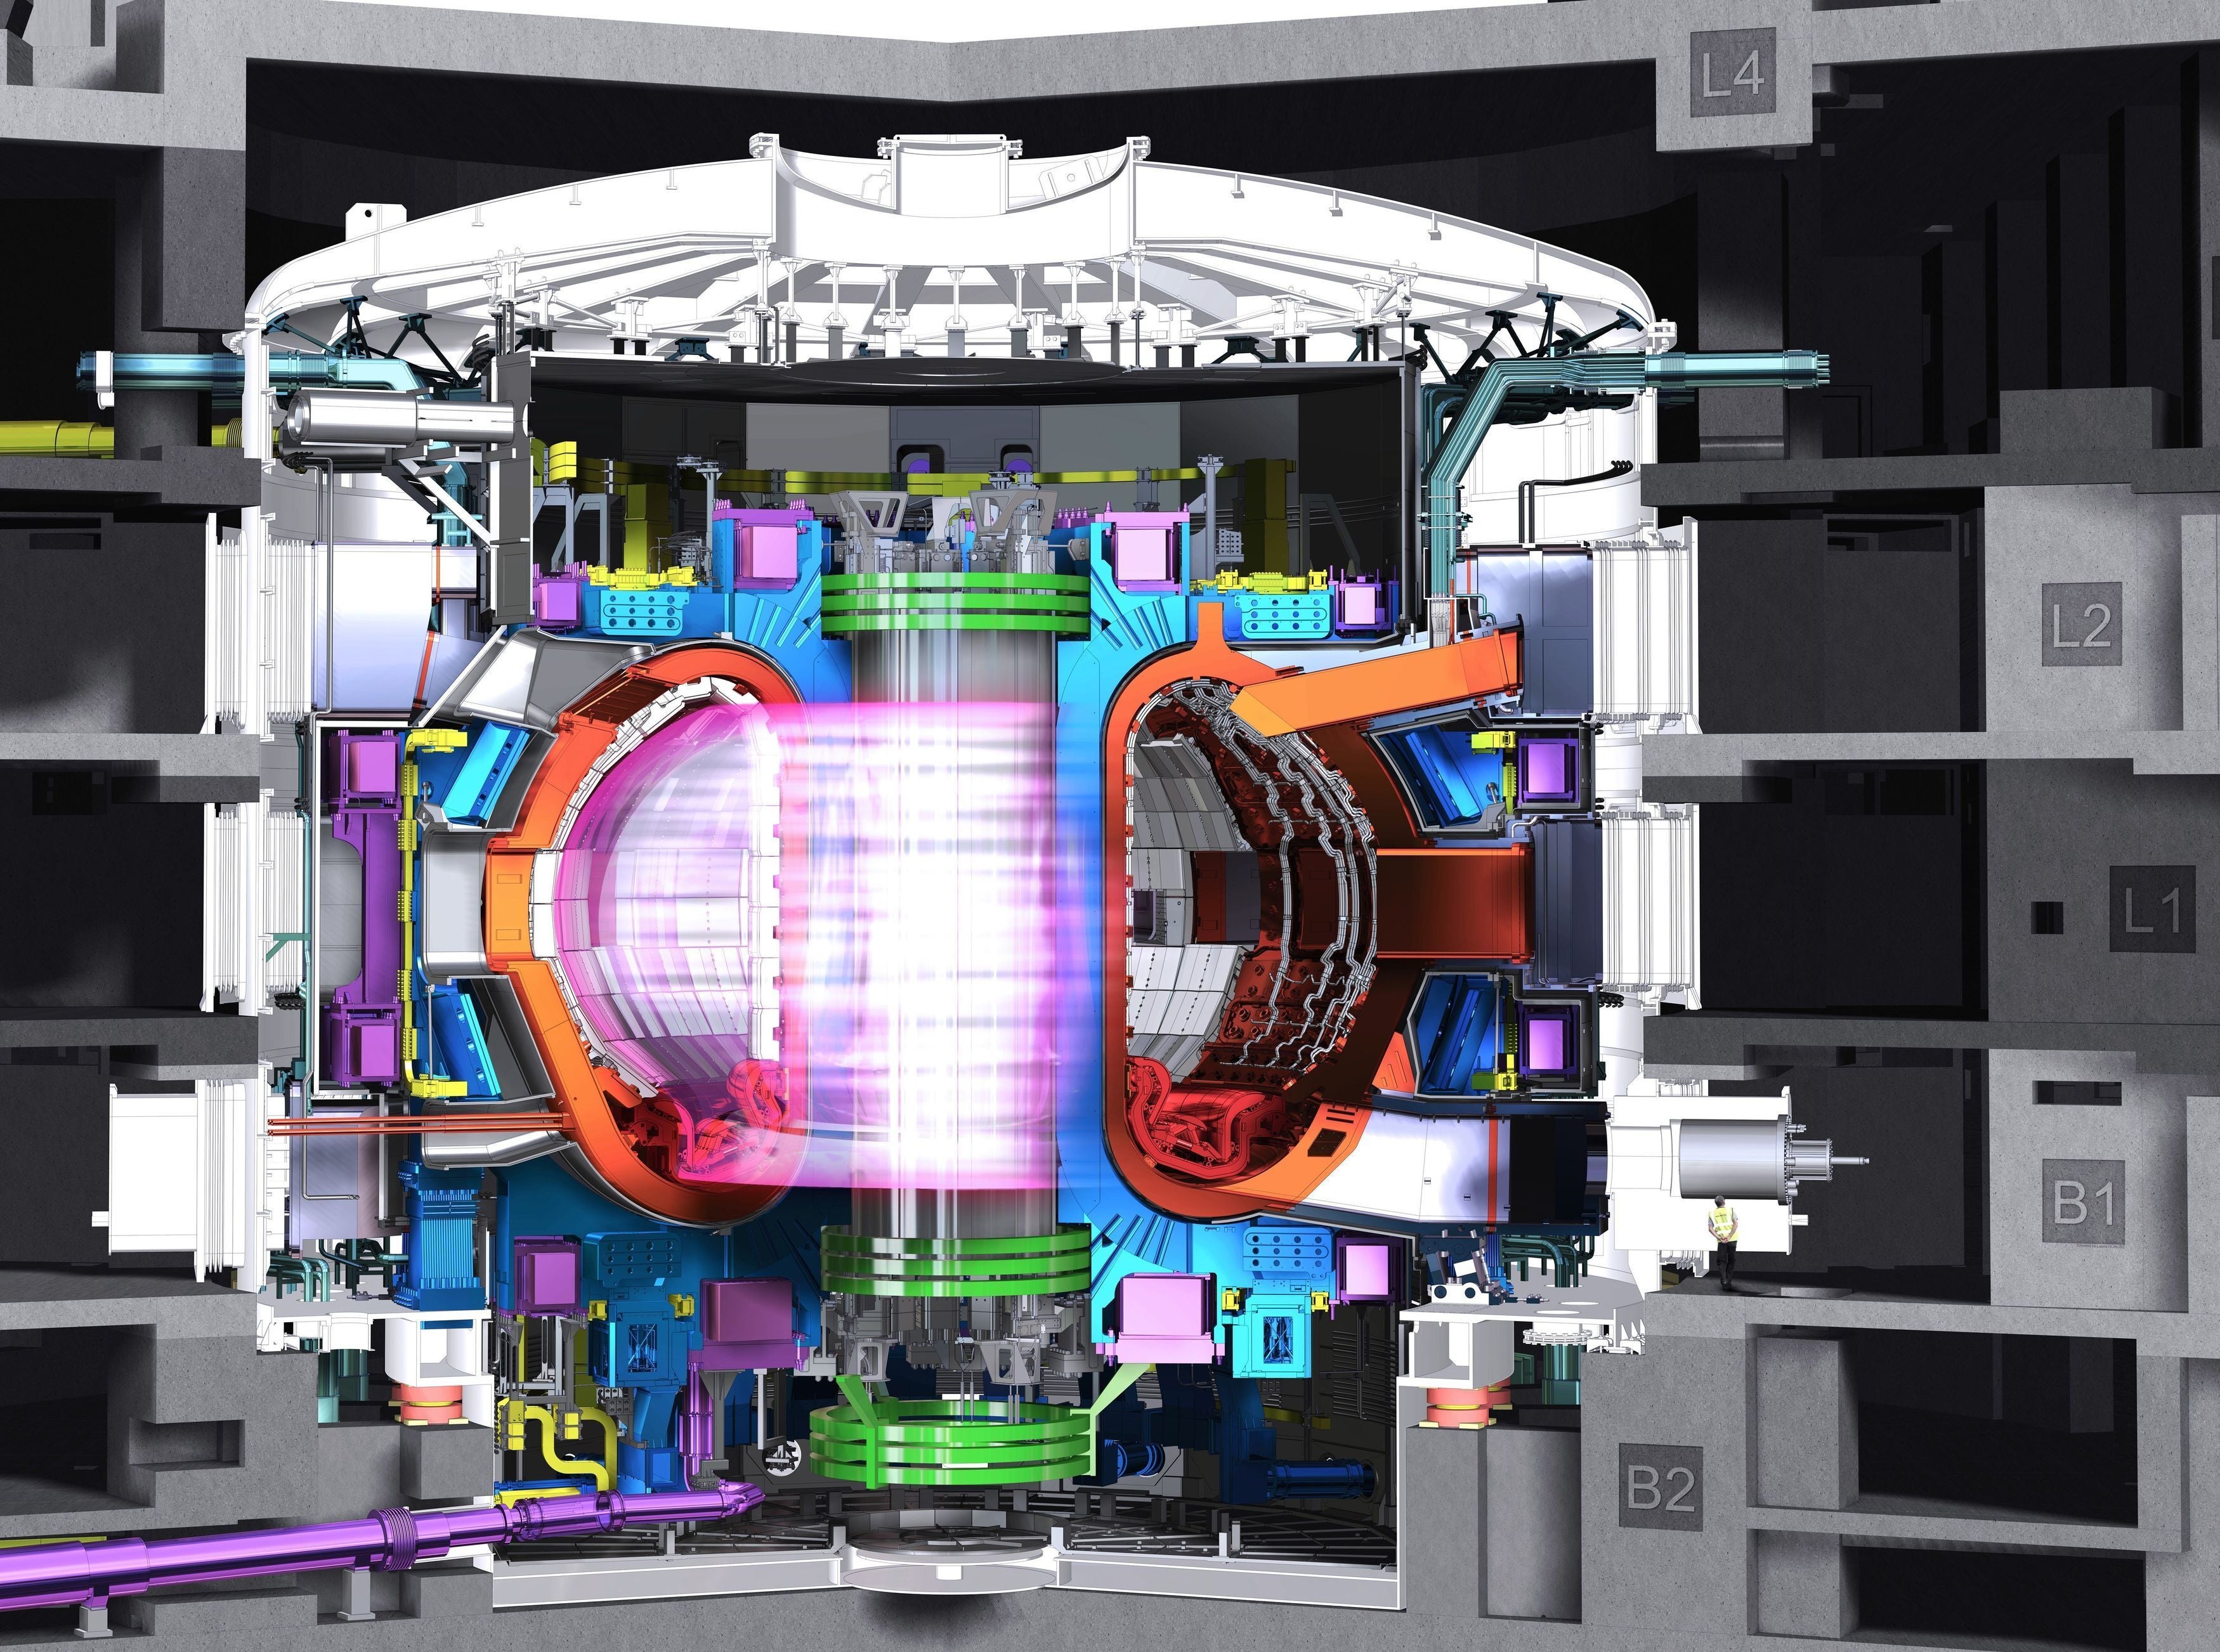 A site in Scotland is being considered for building the world’s first nuclear fusion power plant (ITER Organisation/Durham University/PA)